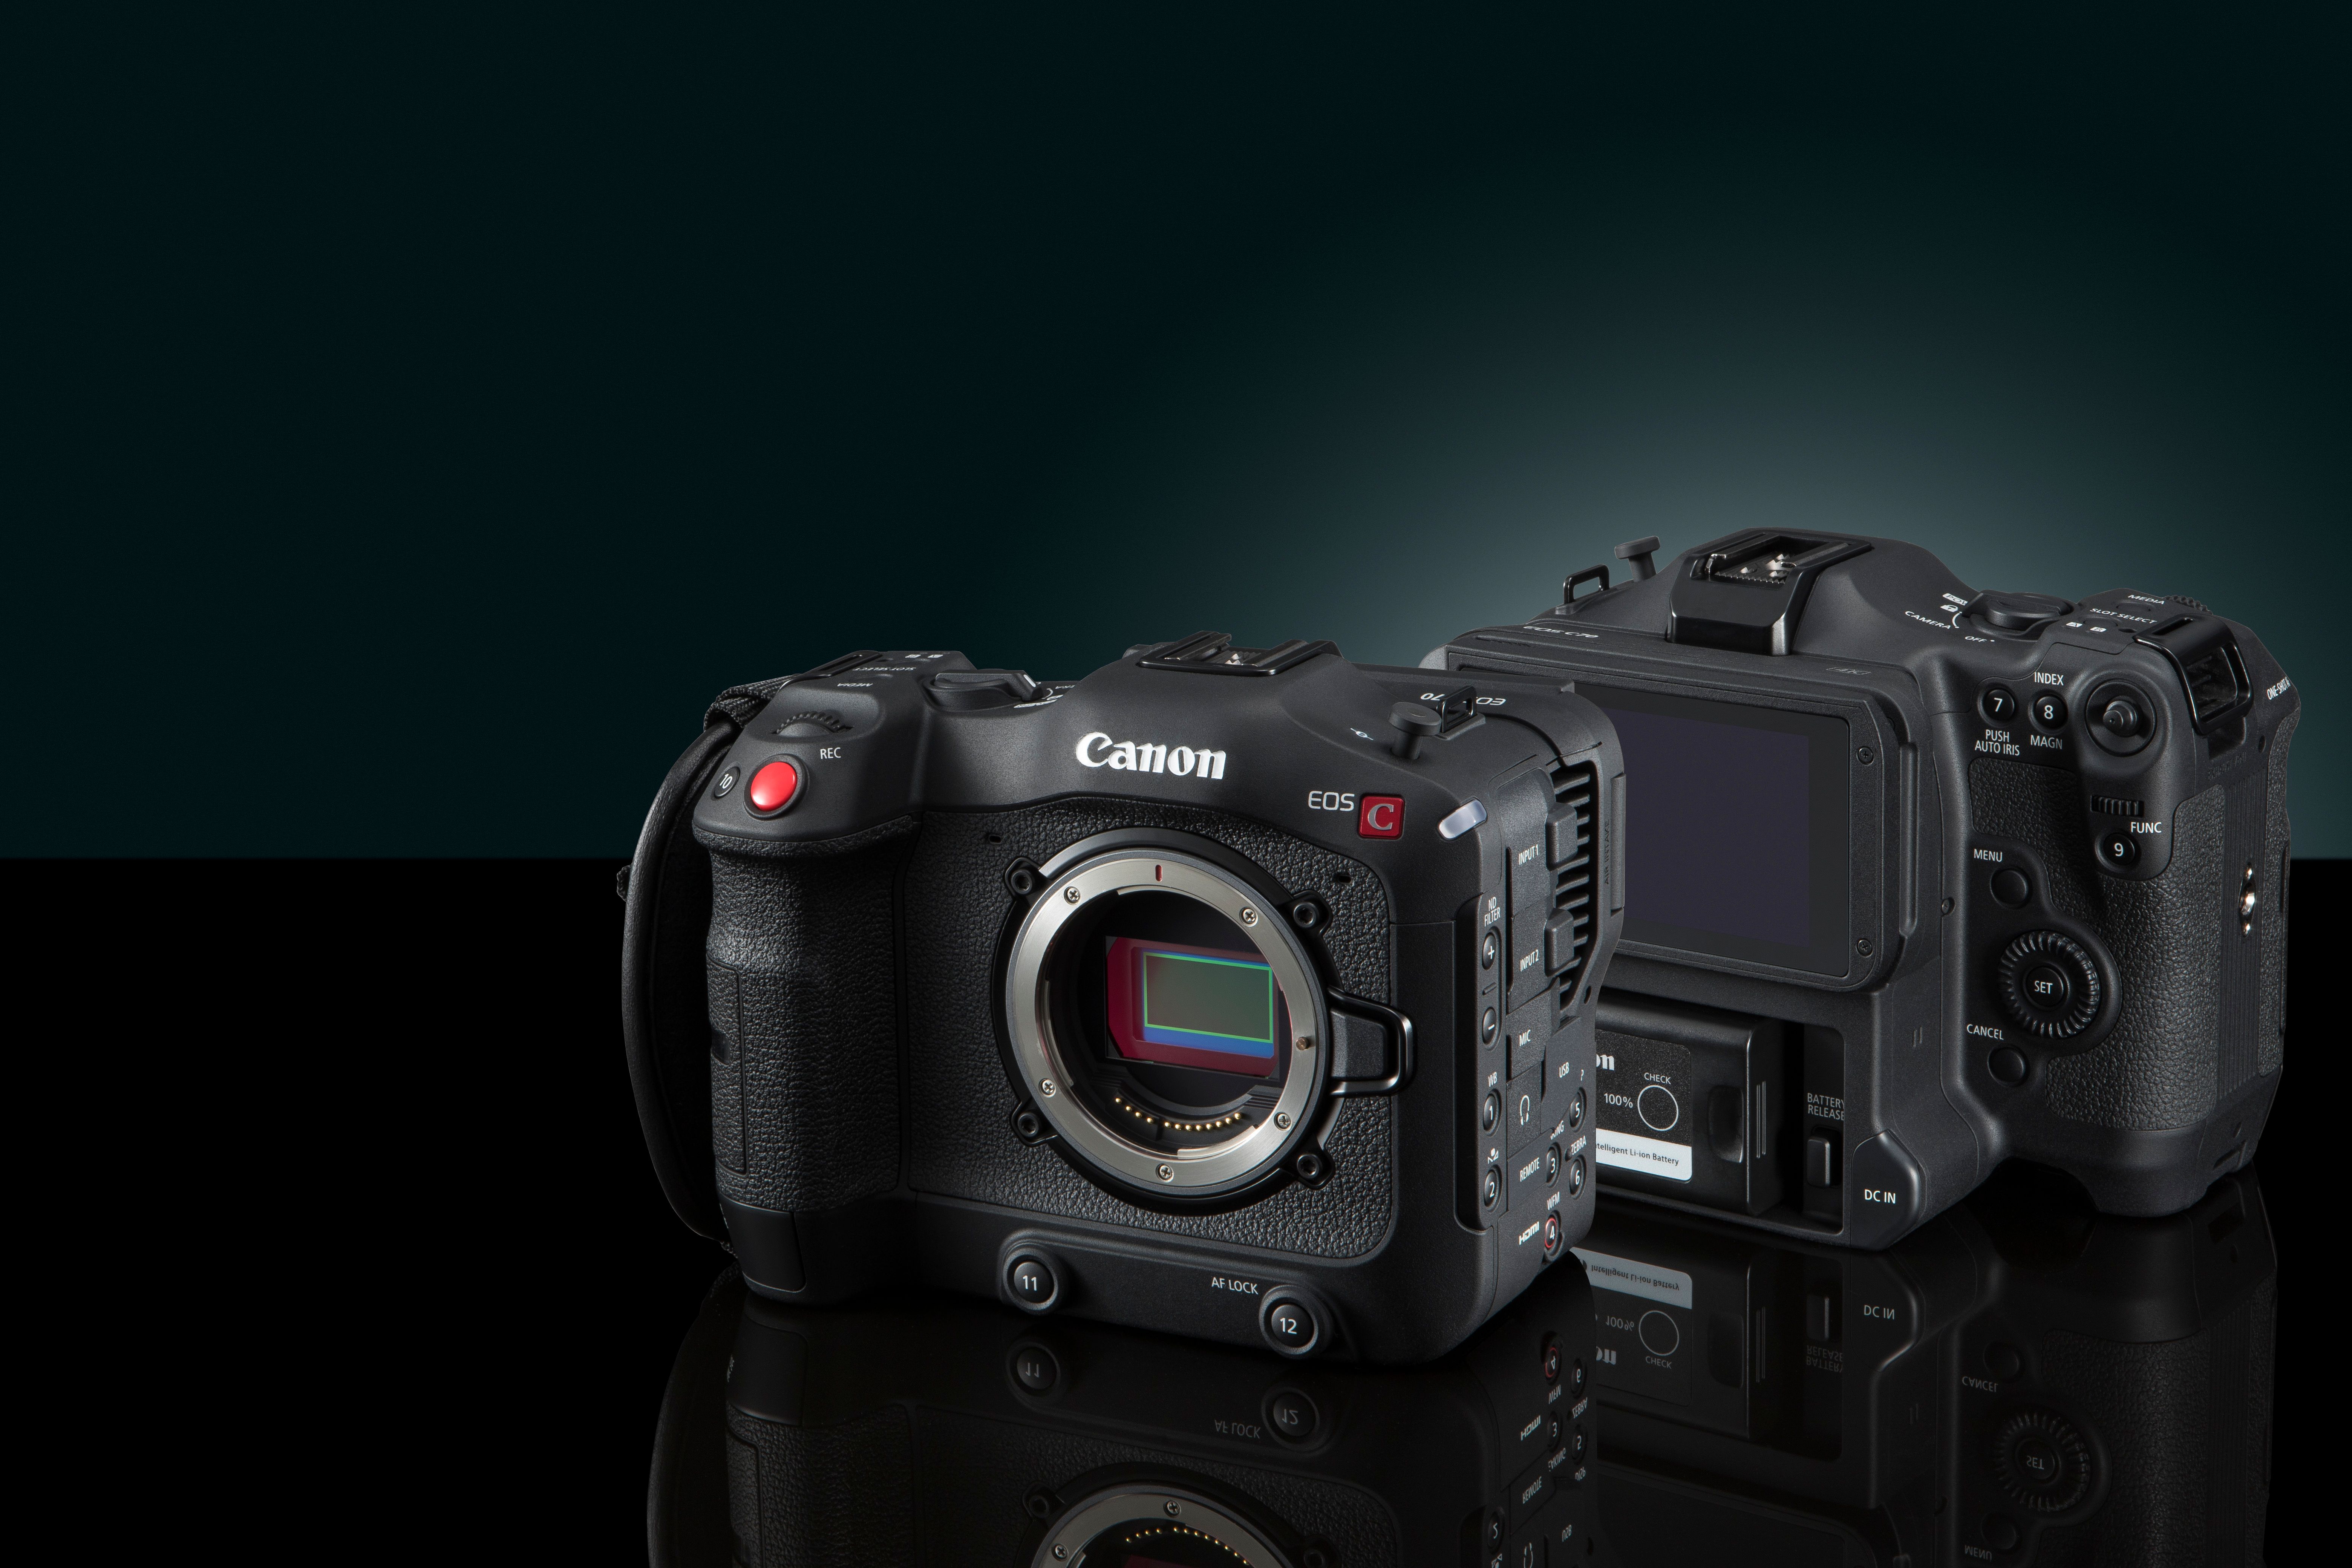 Introducing the Canon EOS C70